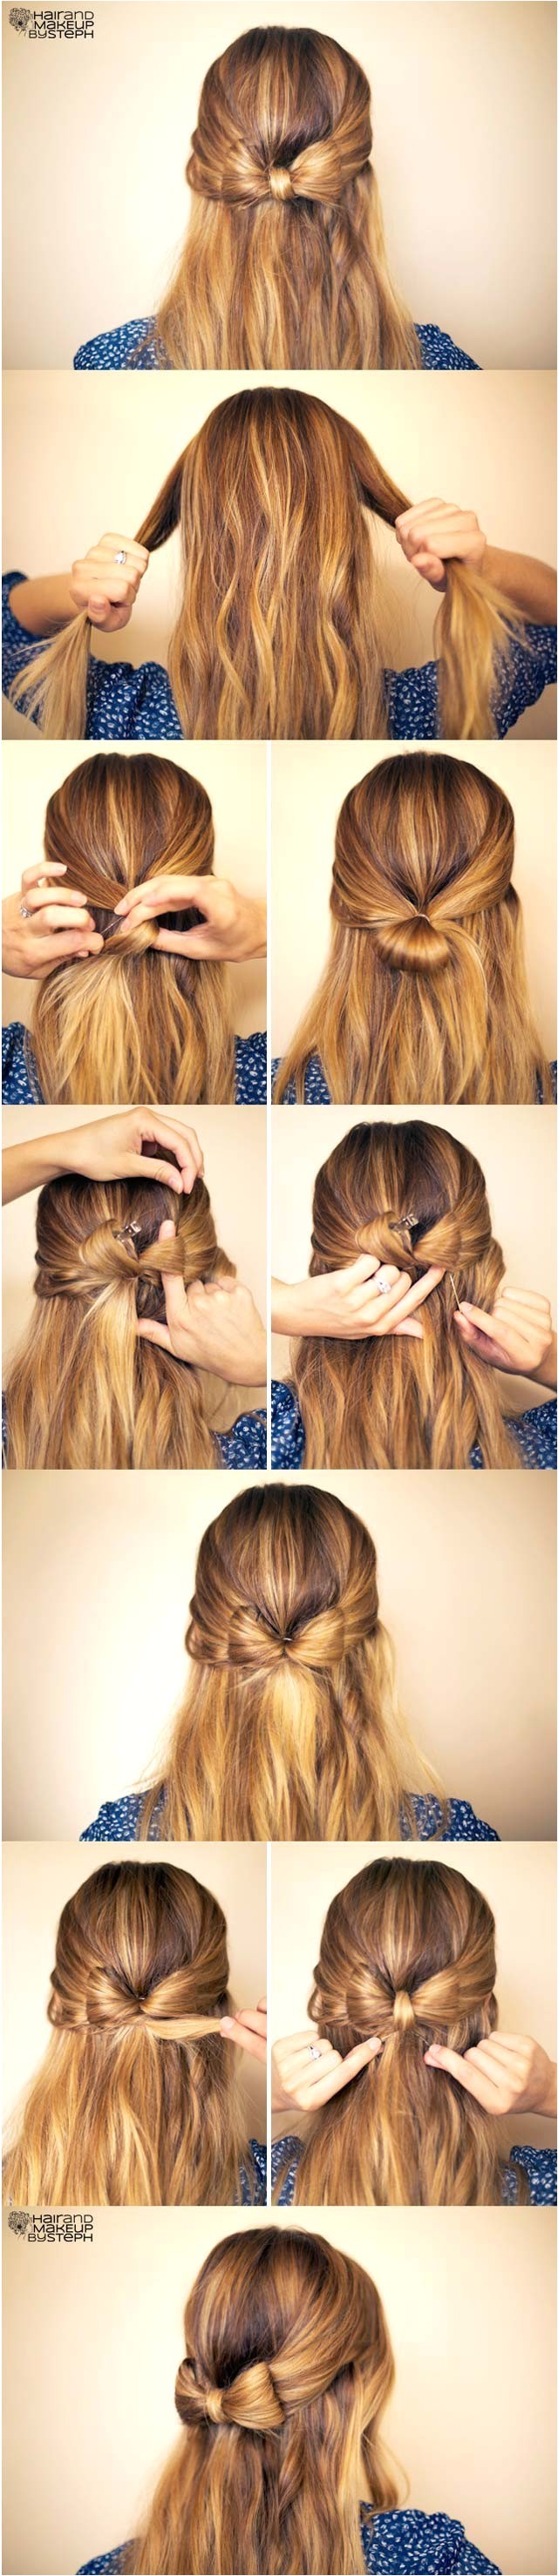 15 cute hairstyles step by step hairstyles for long hair